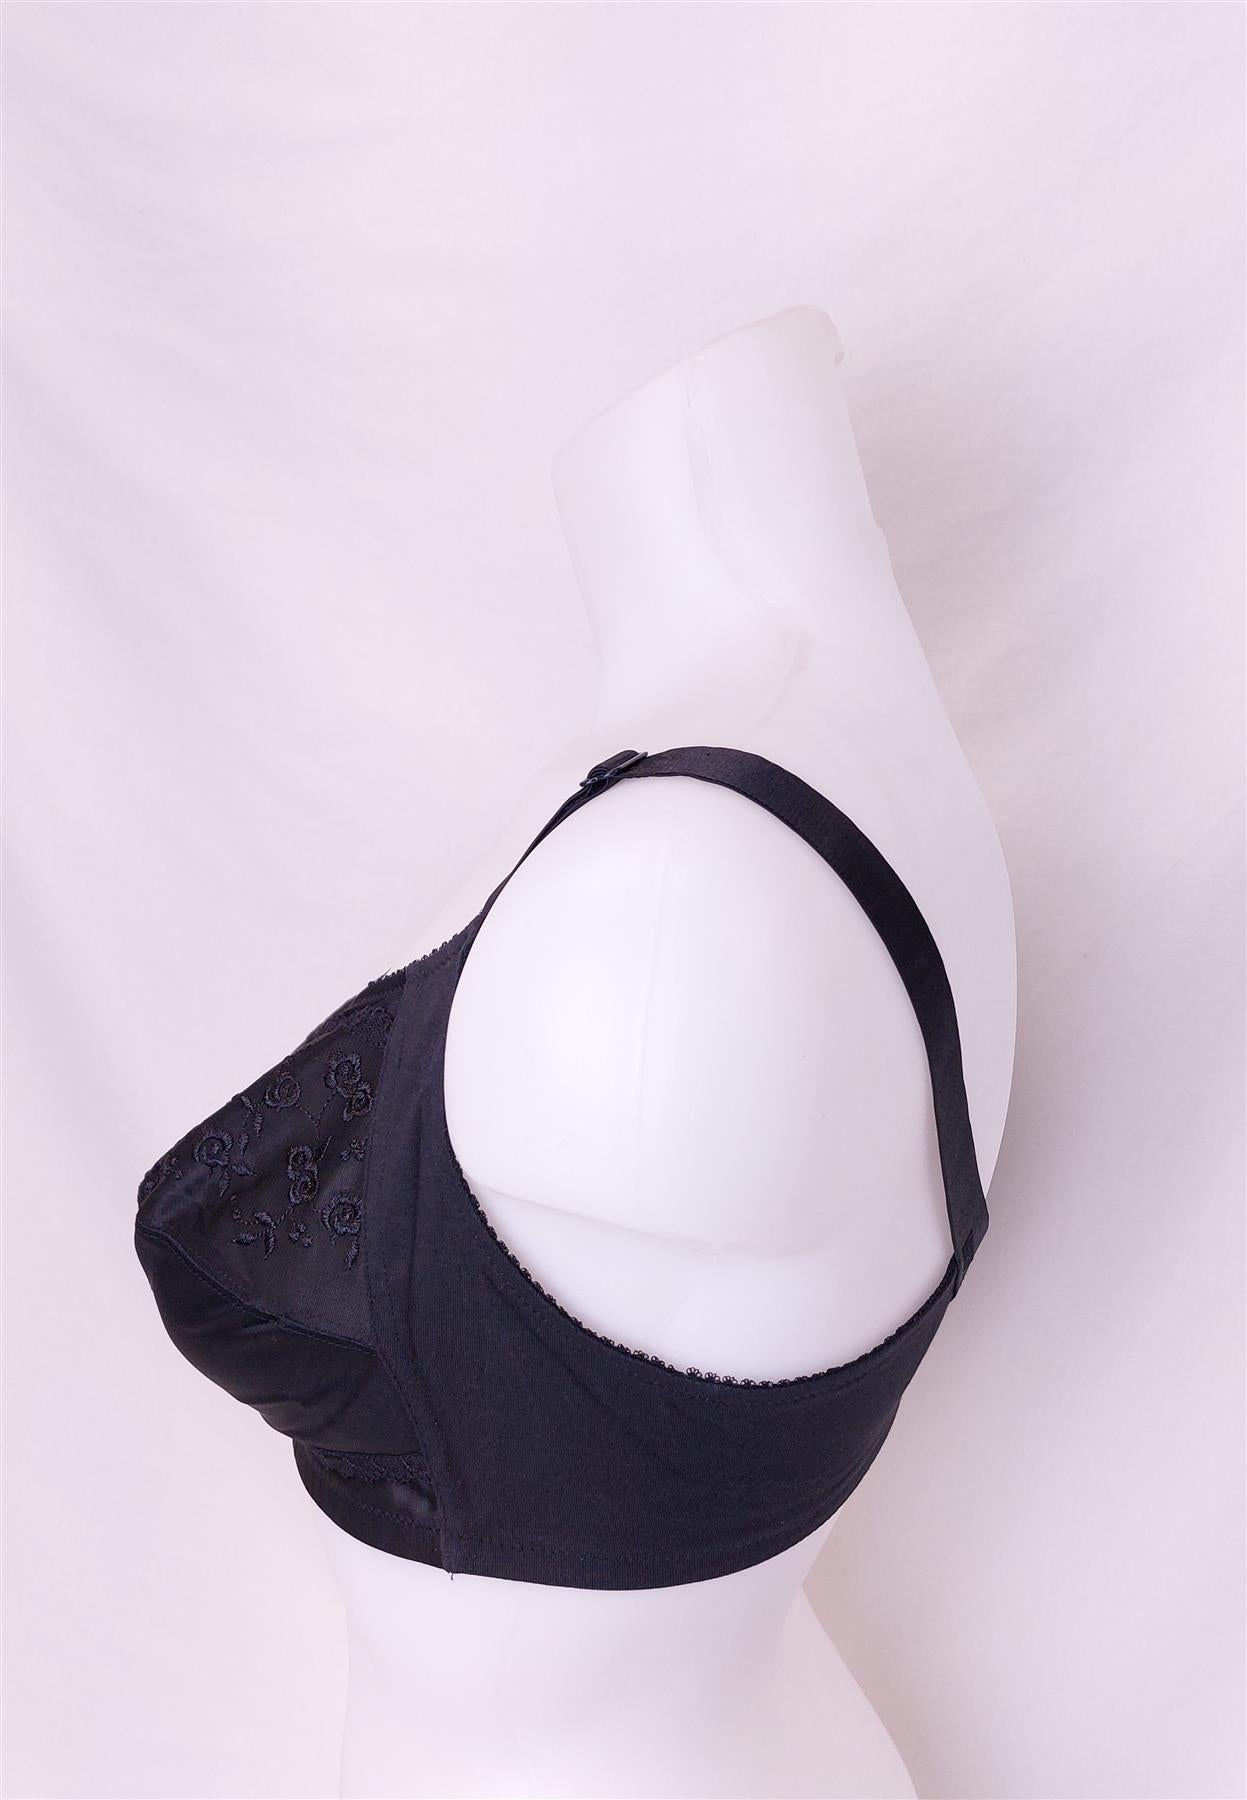 F&F Embroidered Comfort Bra Non-Wired Unpadded Black Floral Total Support